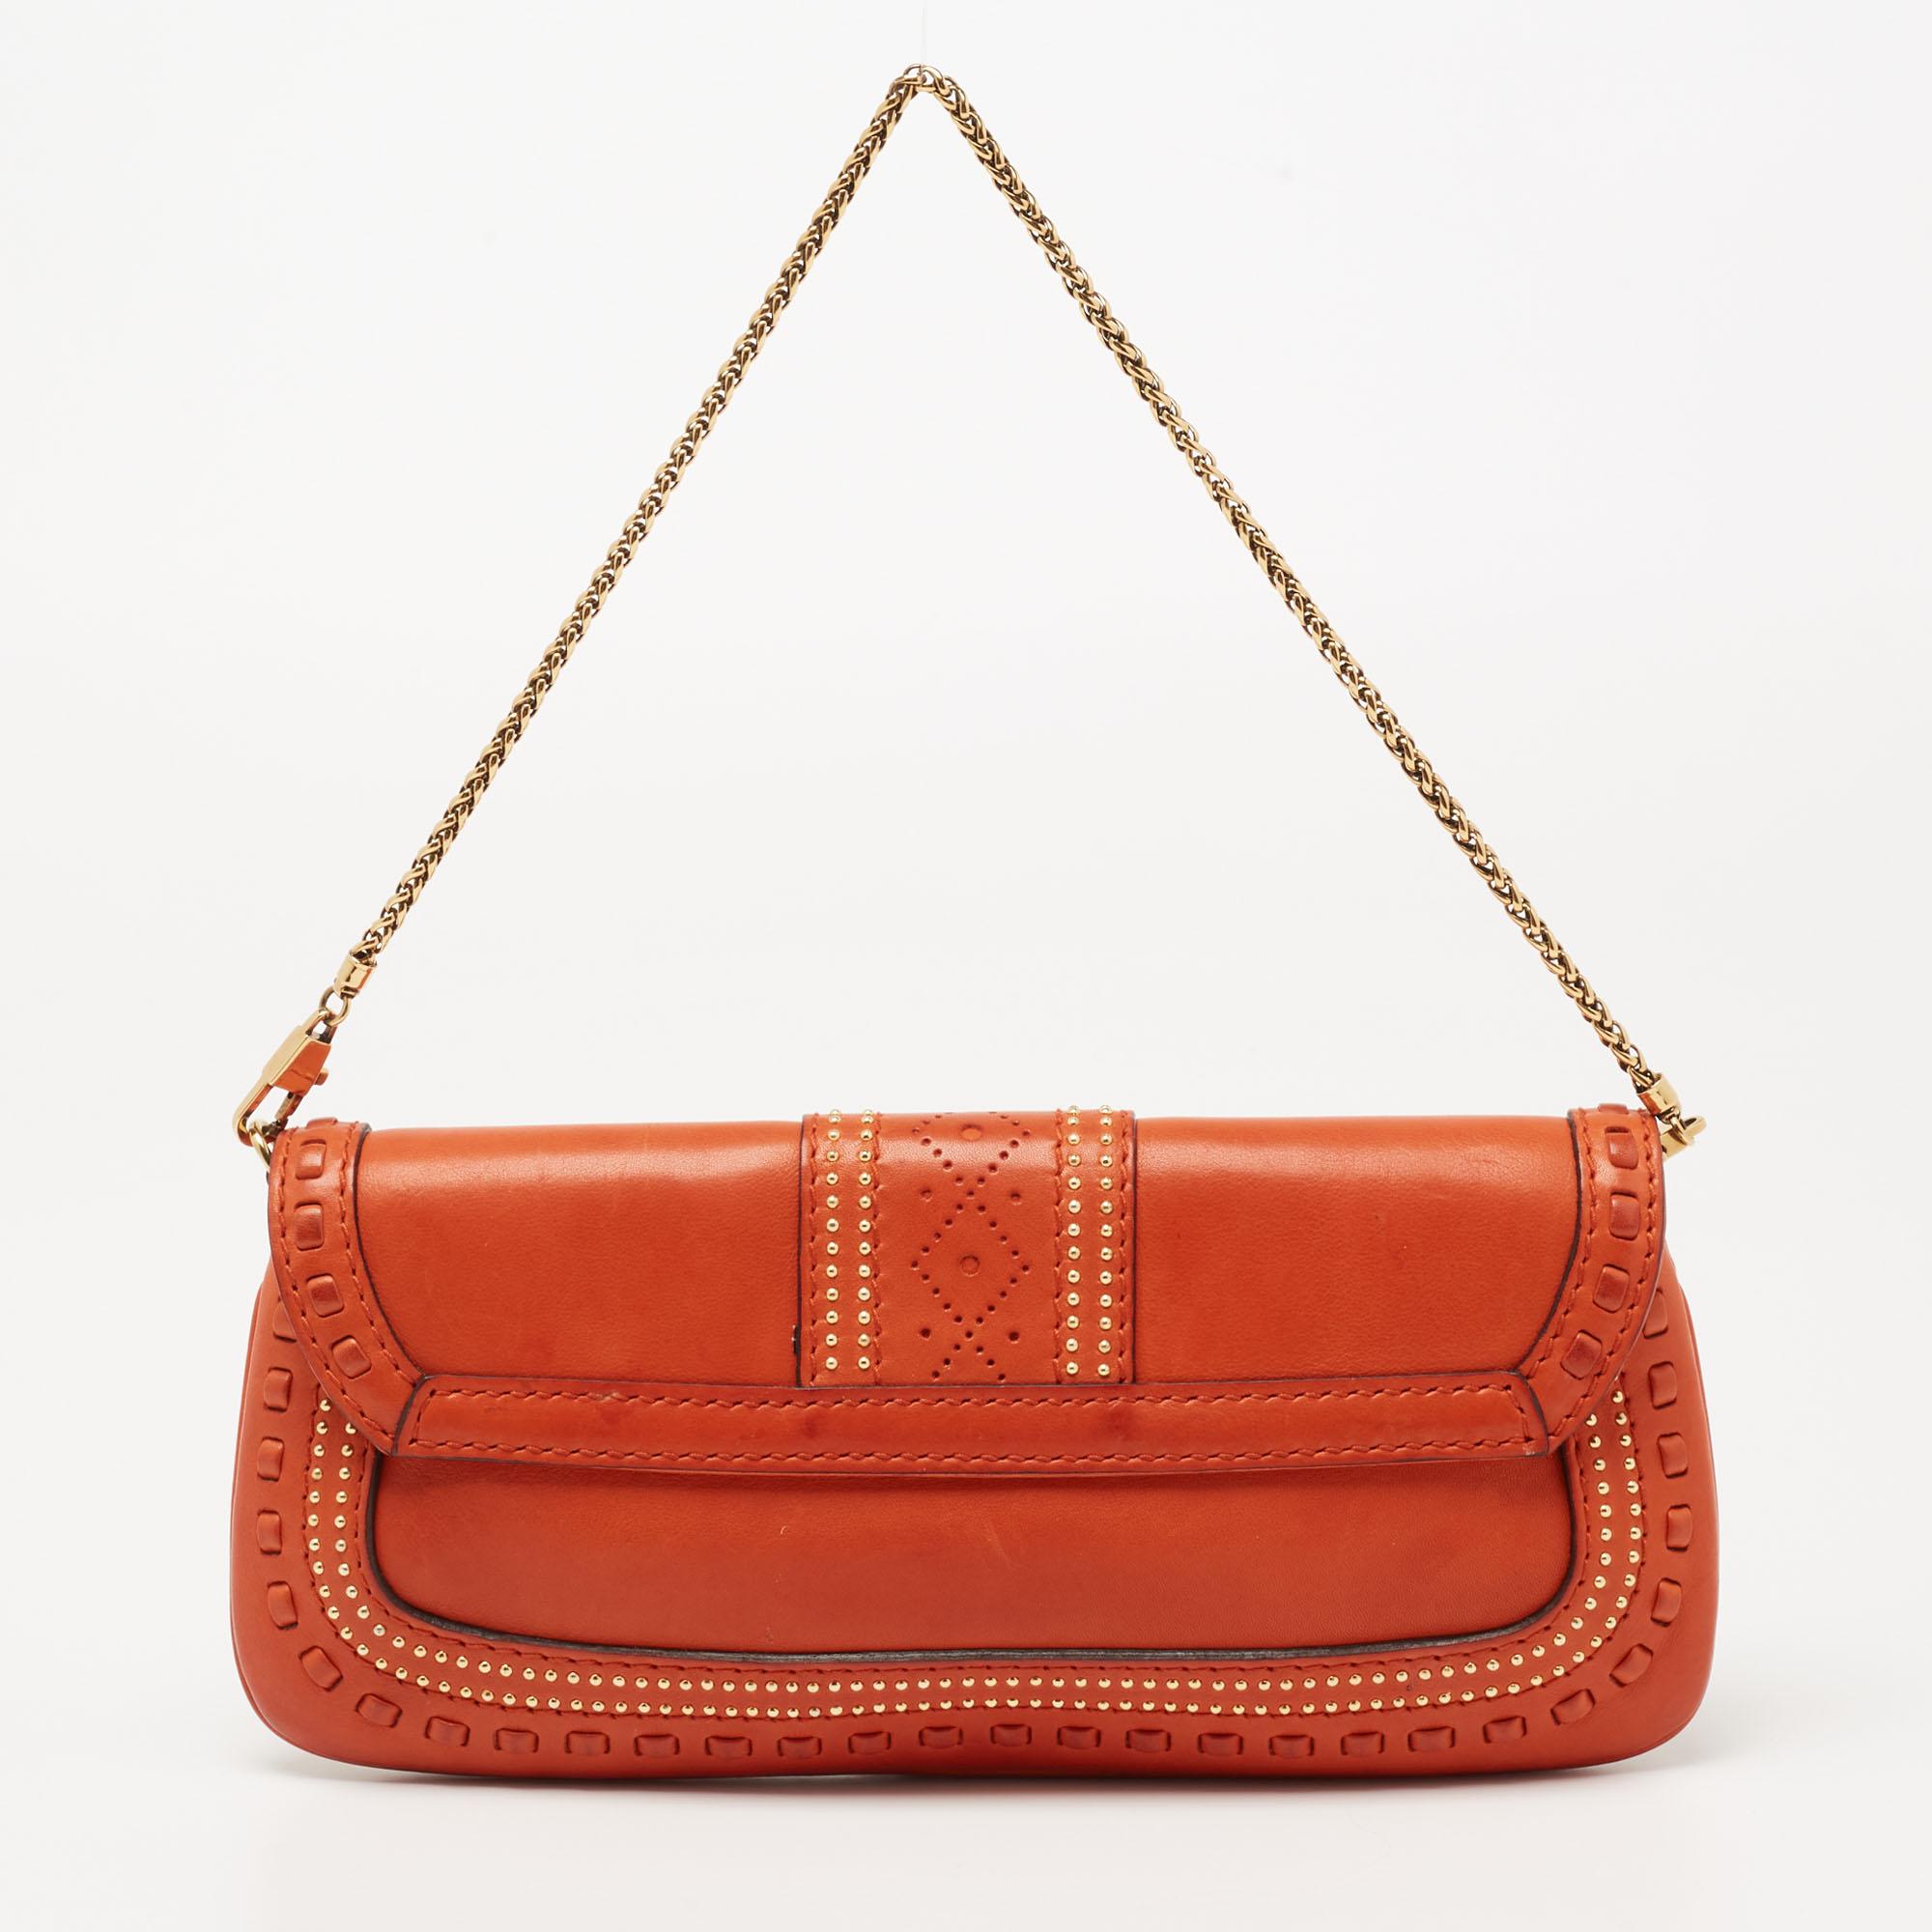 
This Gucci bag is a timeless piece that can last you season after season. This bag is made of leather and sized to house all the things you need. It has an orange shade, gold-tone metal detailing, a shoulder chain, and Alcantara lining.

